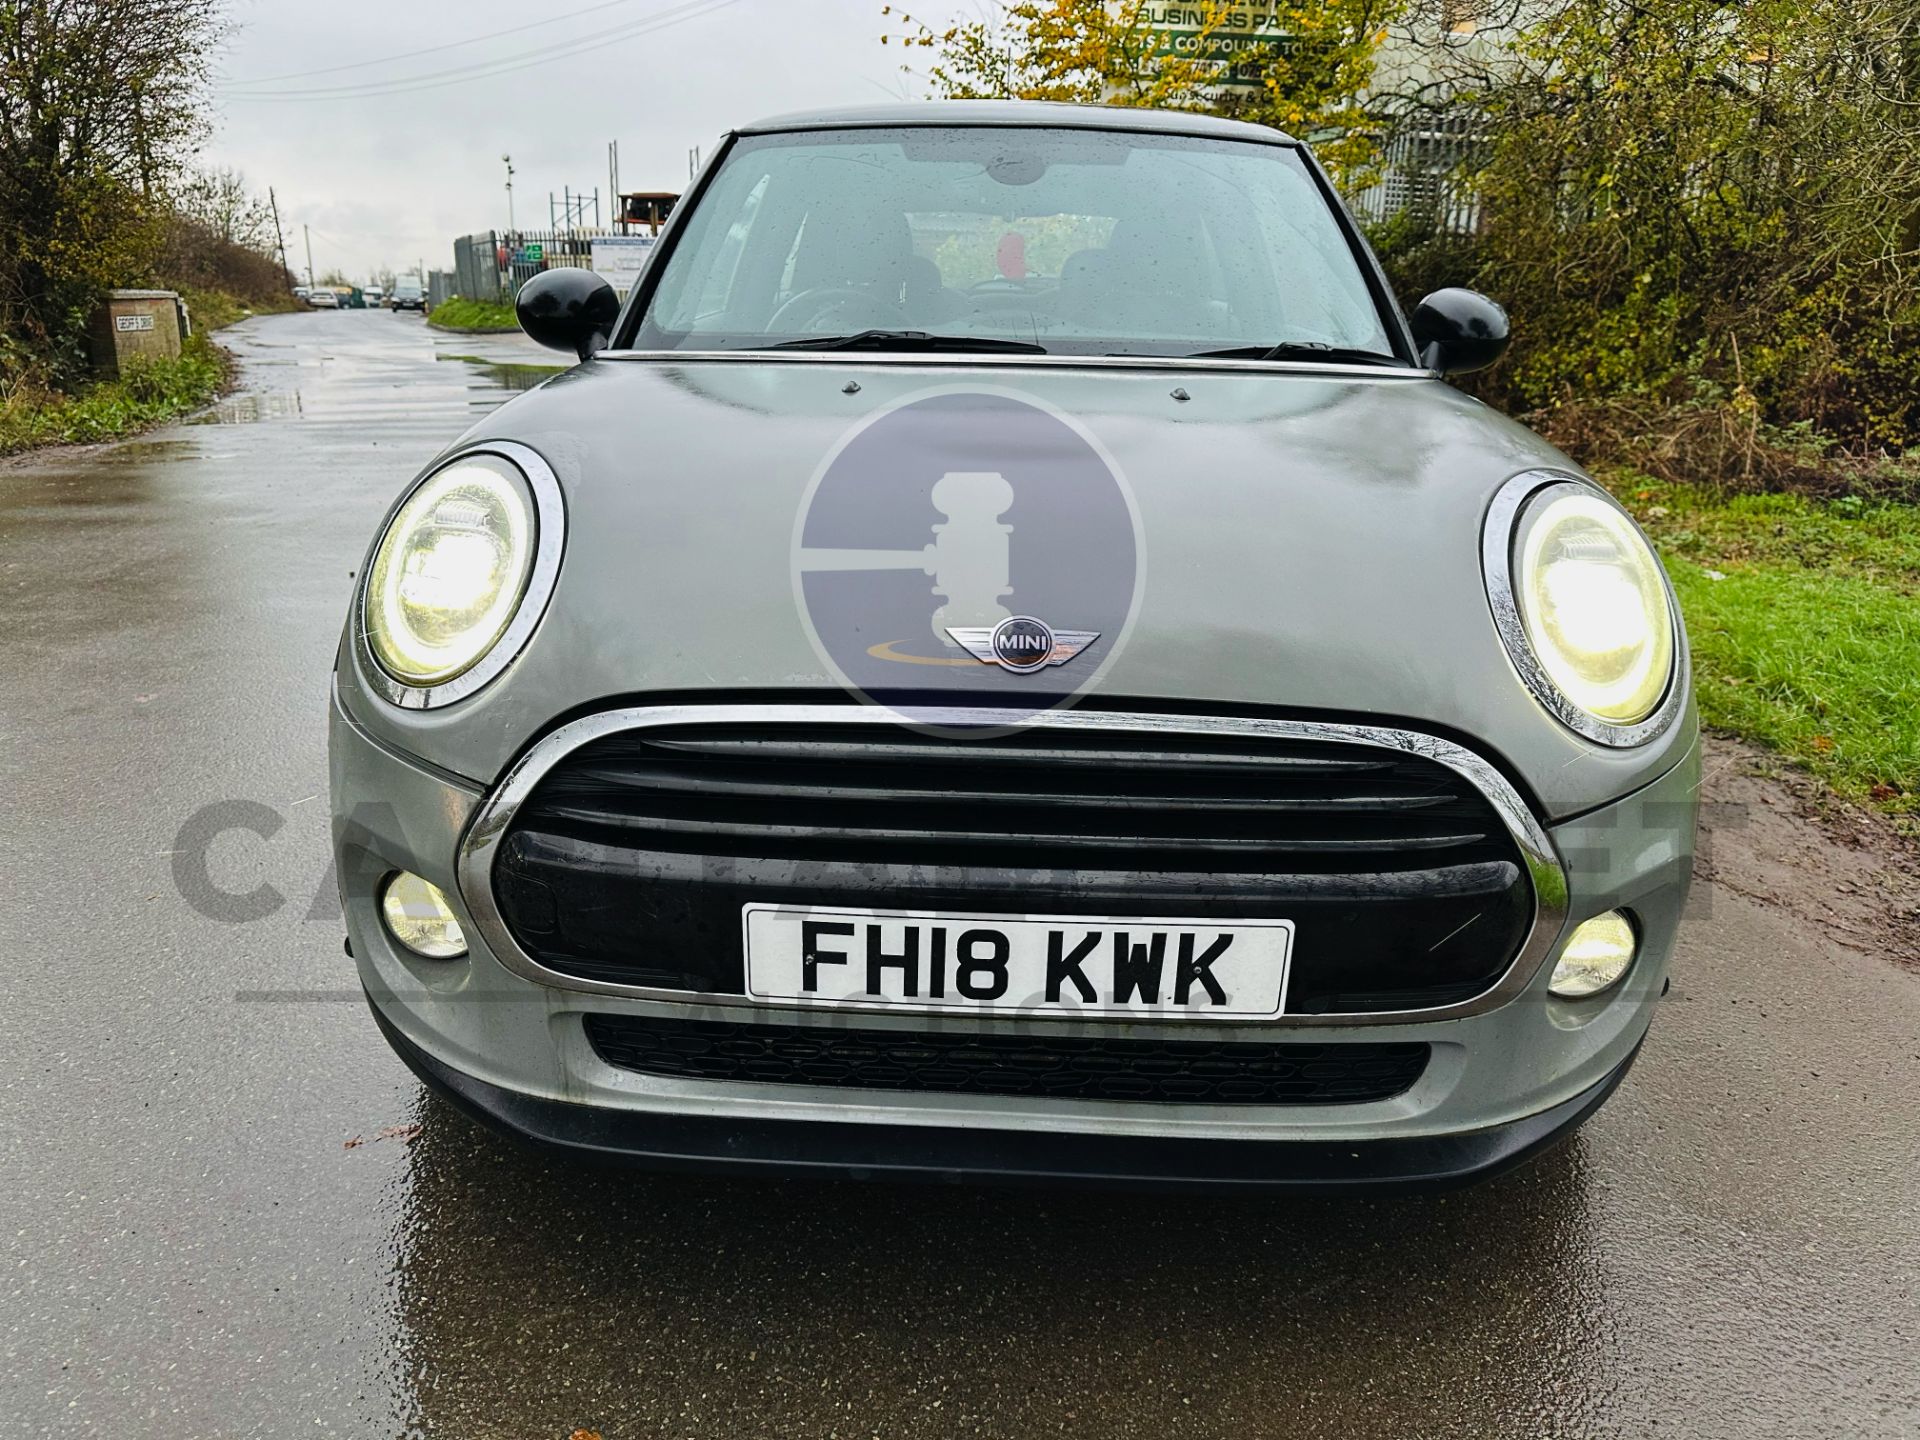 (ON SALE) MINI ONE 1.5 PETROL (18 REG) - START / STOP -AIR CONDITIONING -ONLY 35K MILES - NO VAT! - Image 4 of 39